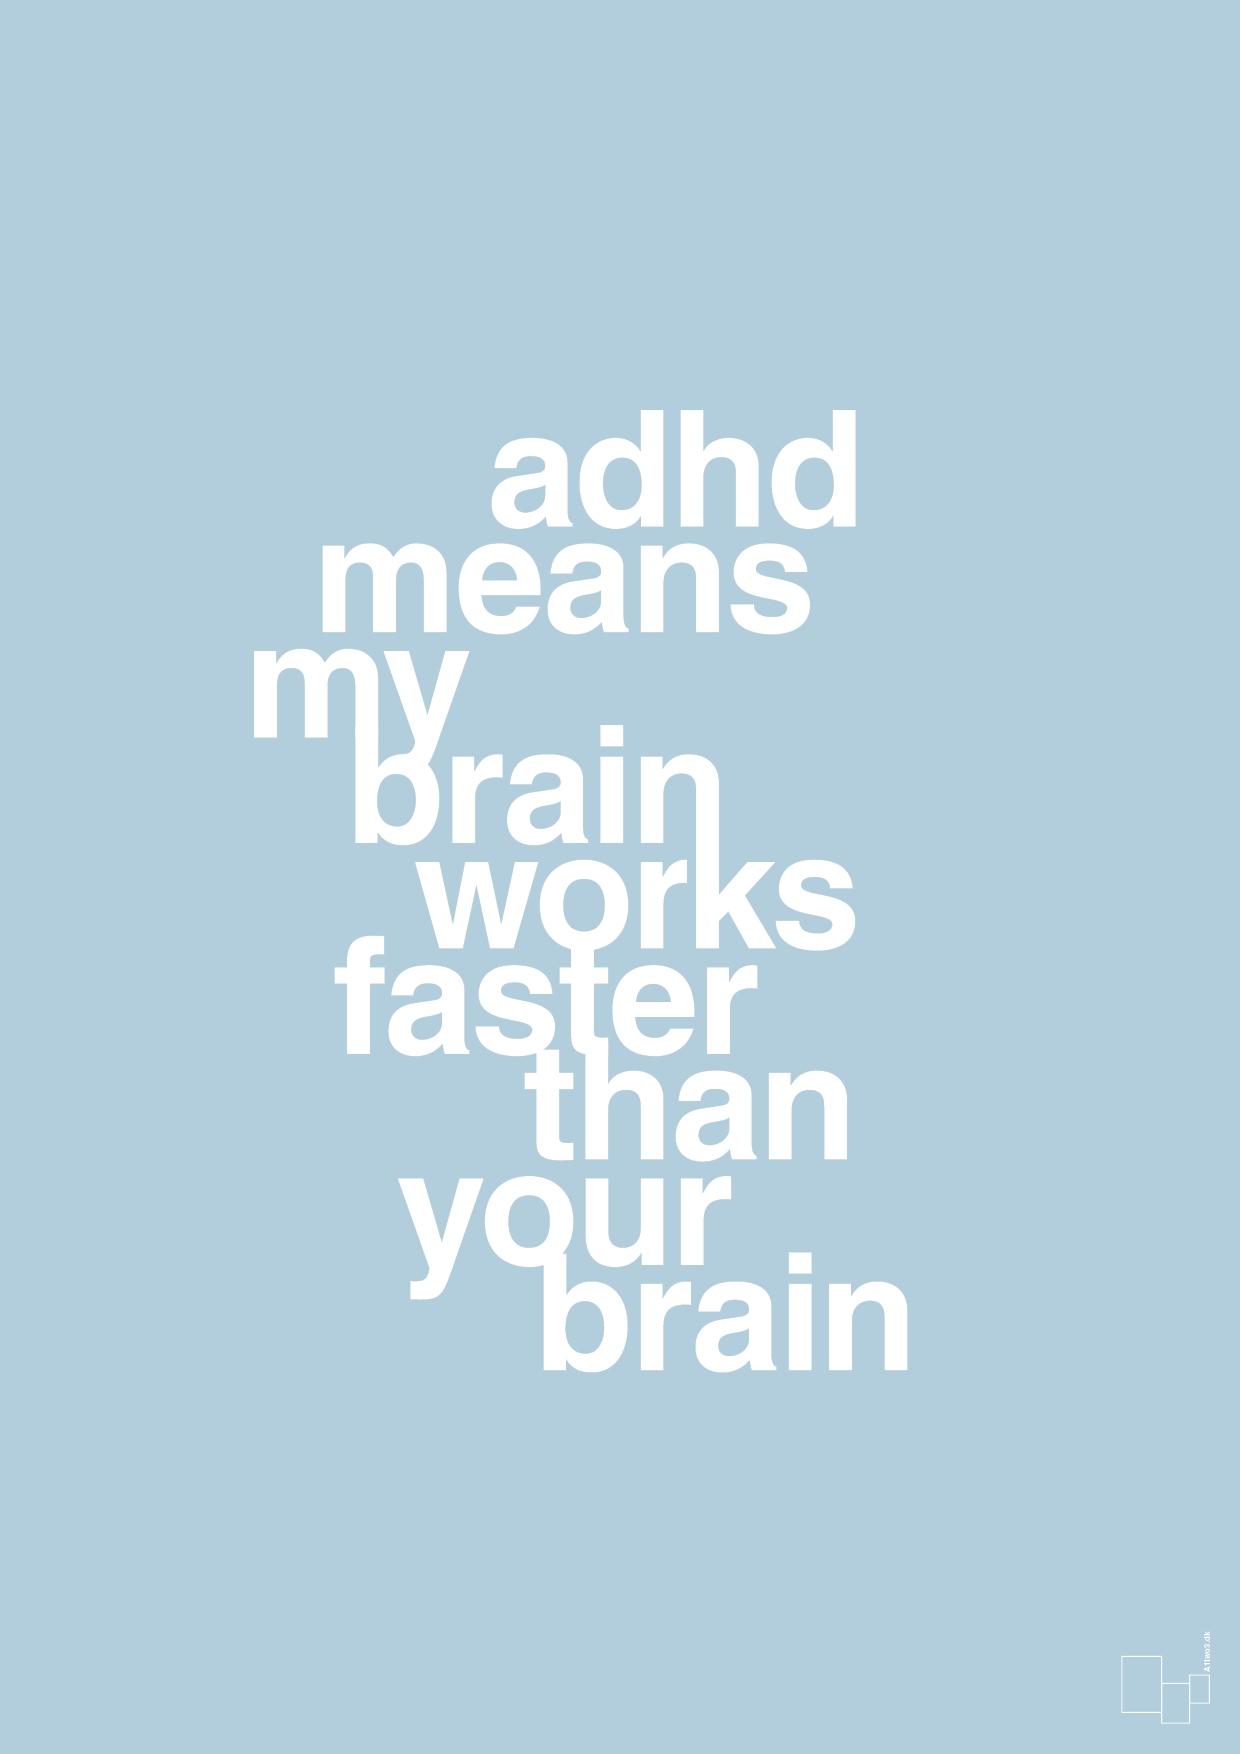 adhd means my brain works faster than your brain - Plakat med Samfund i Heavenly Blue